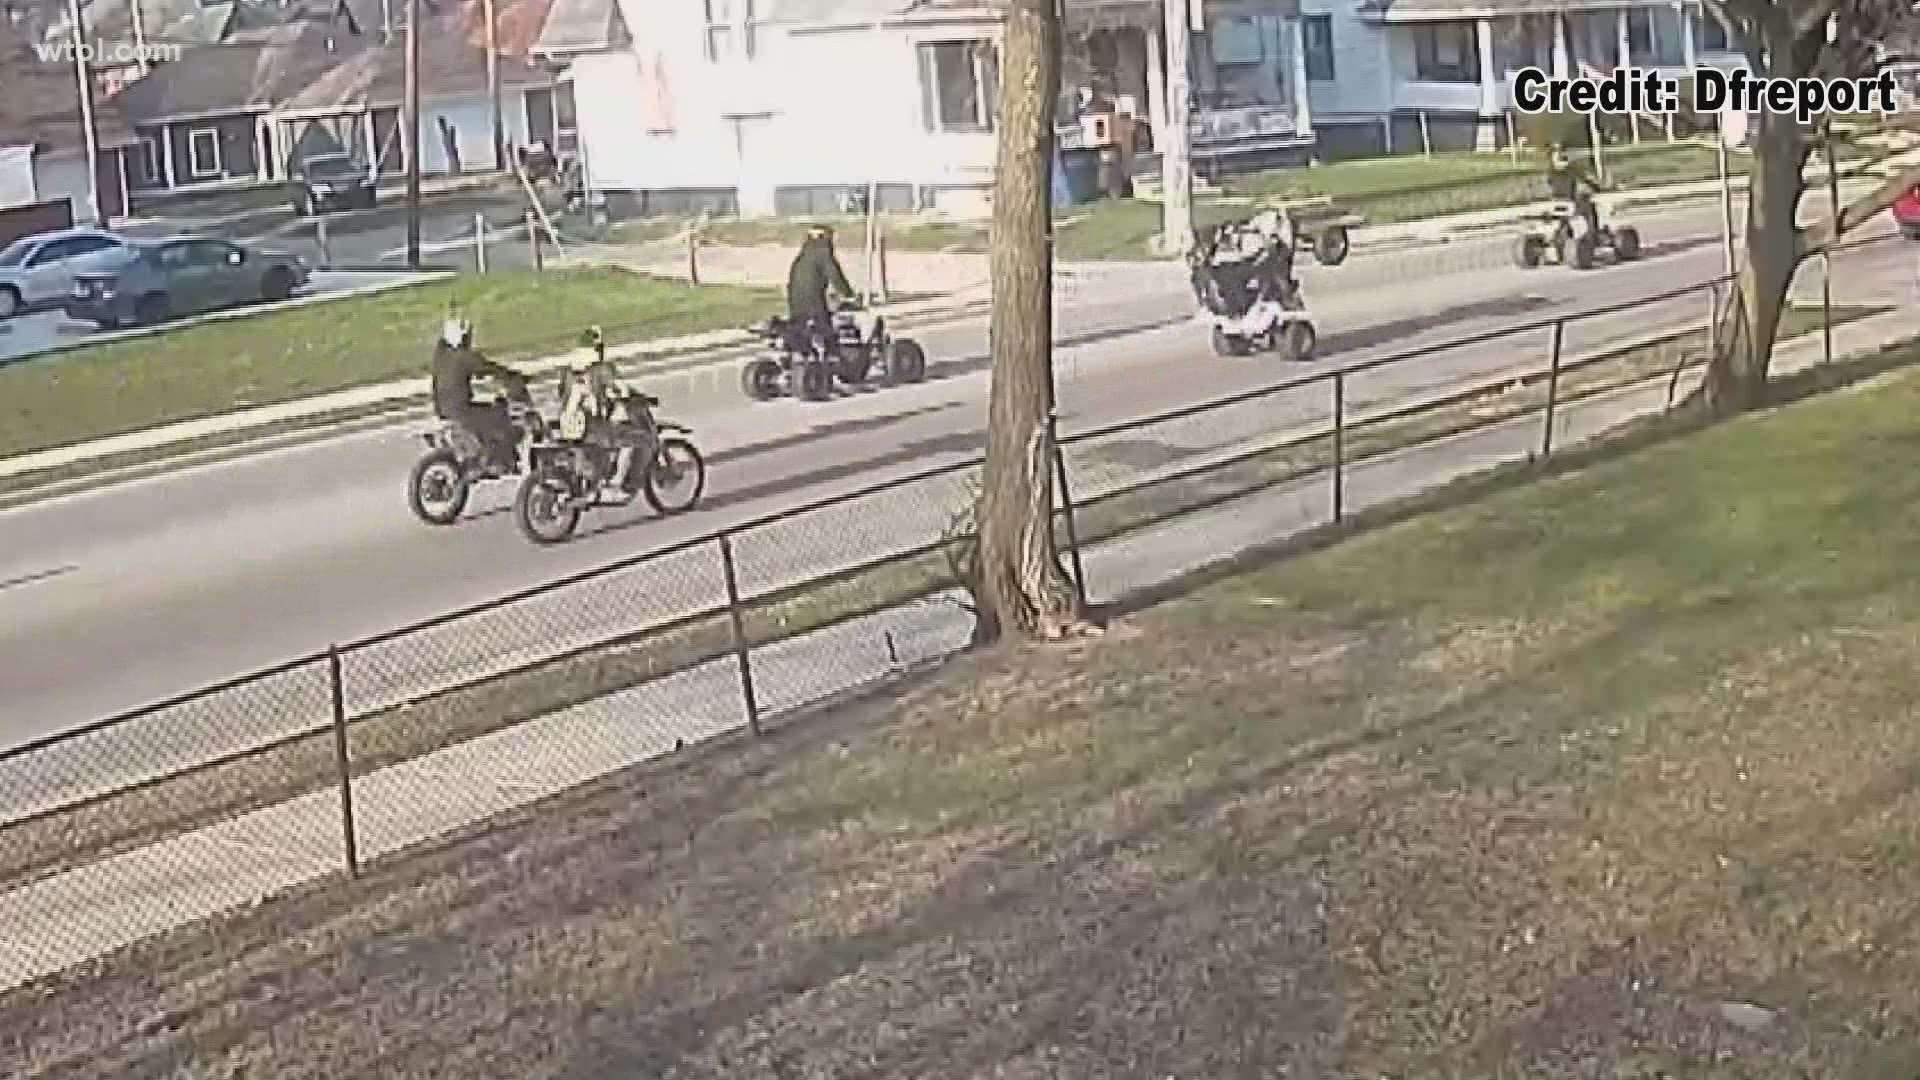 Toledo police have been fielding complaints about groups of people on dirt bikes and four-wheelers tearing up yards and neighborhood parks.